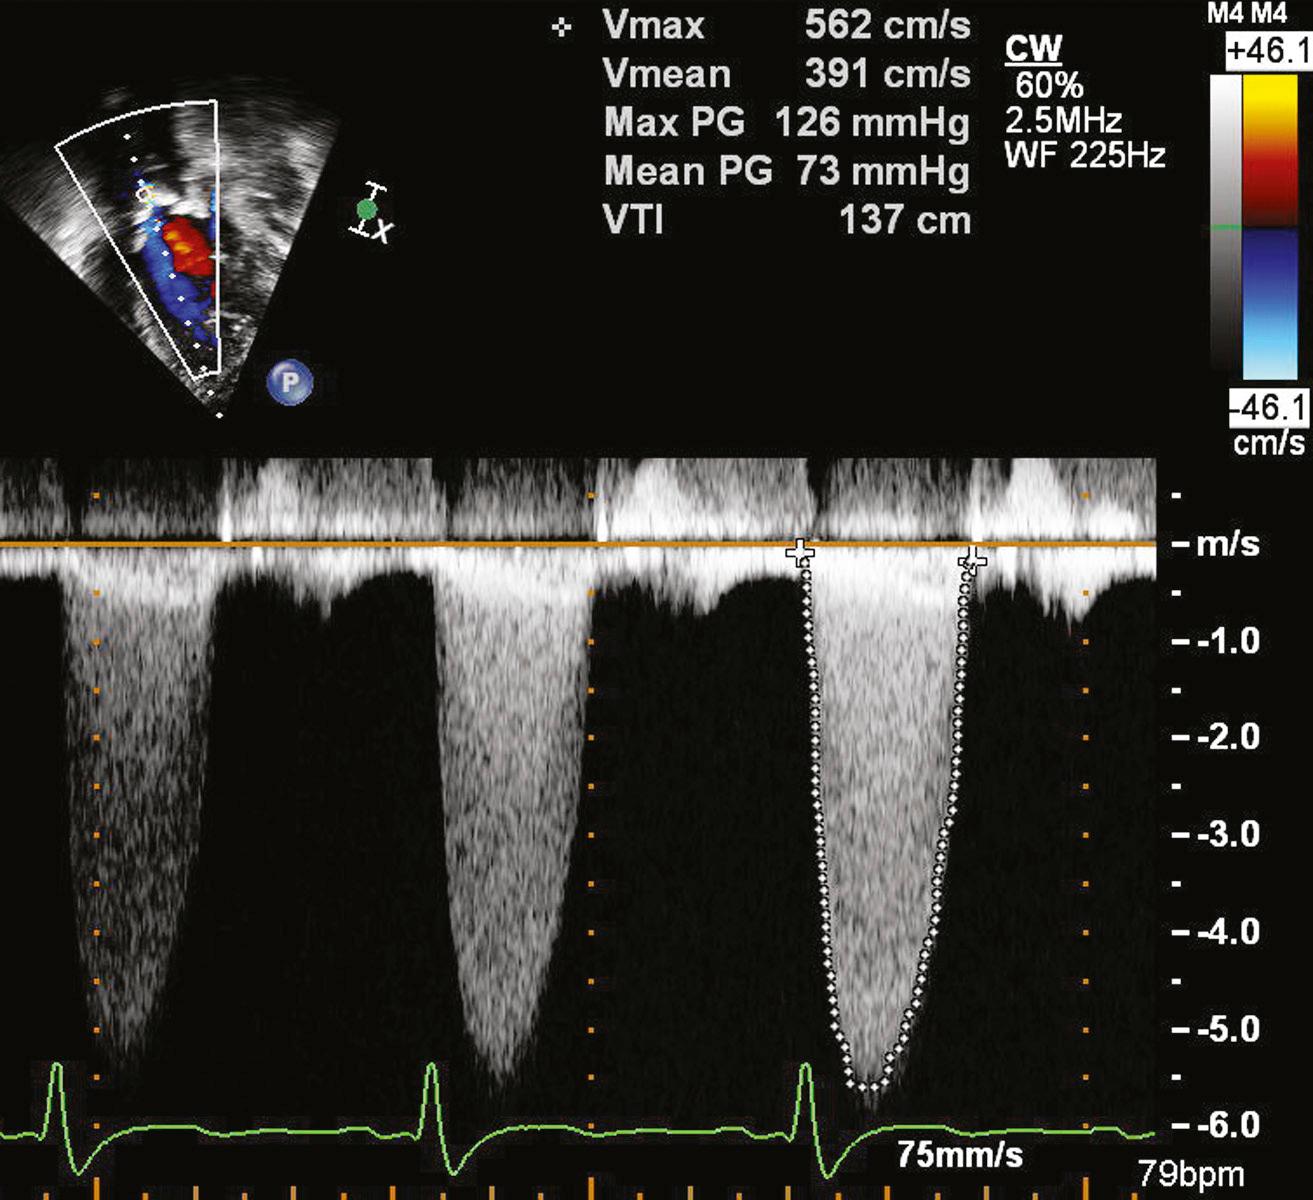 FIGURE 106-4, Doppler echocardiography. Visualization of a high-velocity jet by color Doppler aids in aligning the continuous wave Doppler cursor in a patient with severe aortic valve stenosis (maximal instantaneous and mean gradients ≈126 and 73 mm Hg, respectively).